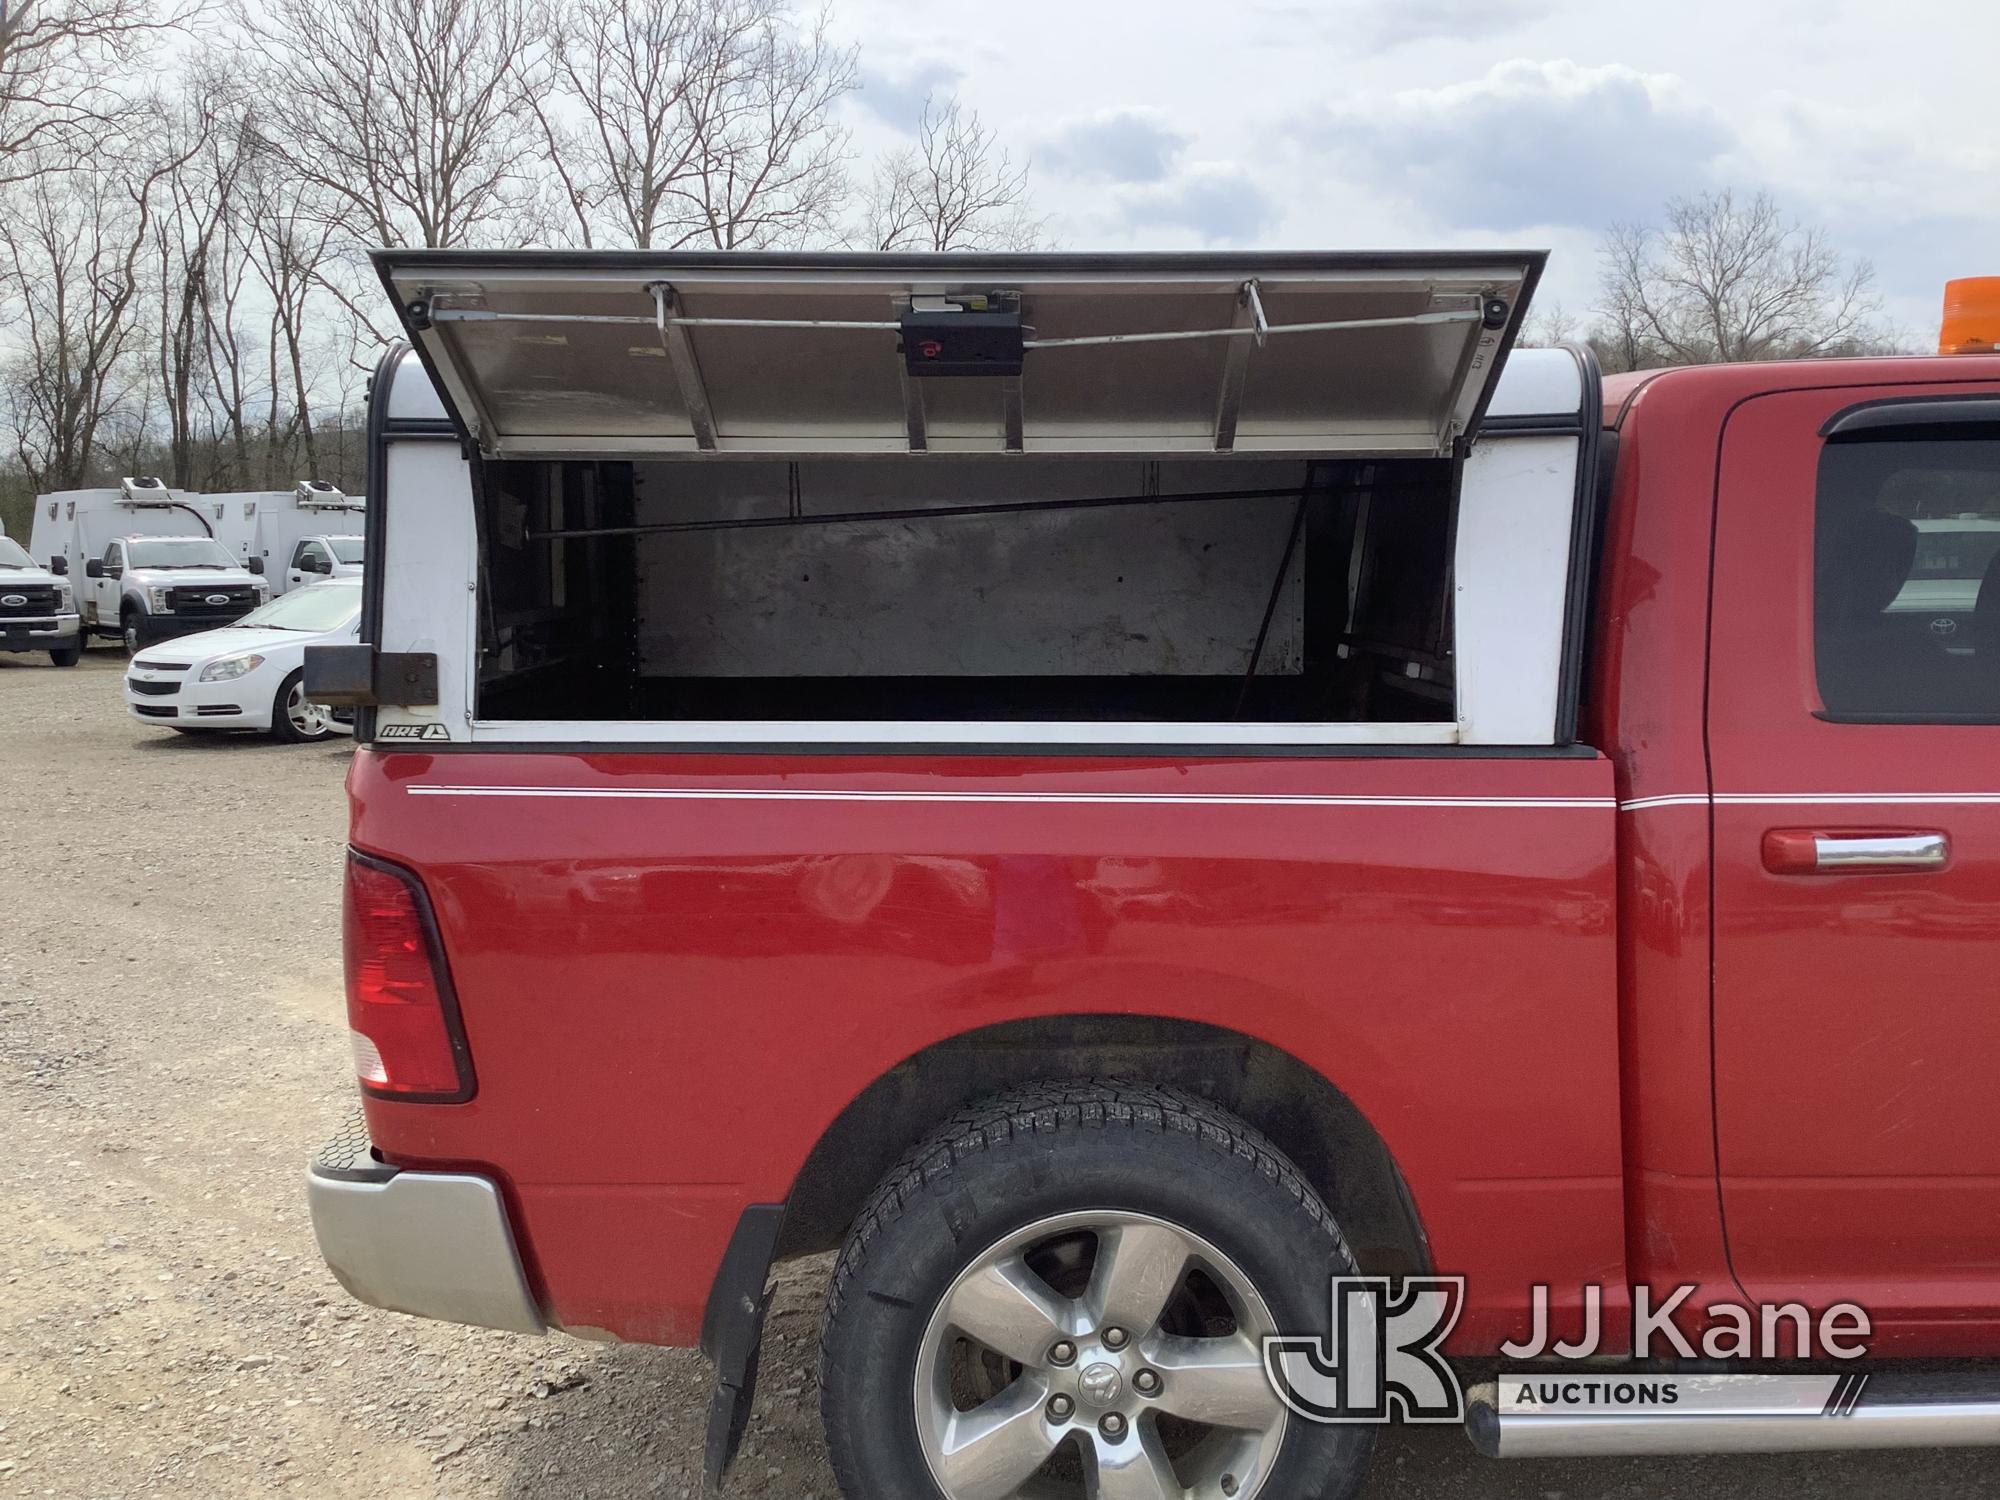 (Smock, PA) 2017 RAM 1500 4x4 Crew-Cab Pickup Truck Physical Title Unavailable, 45 Day Electronic Ti